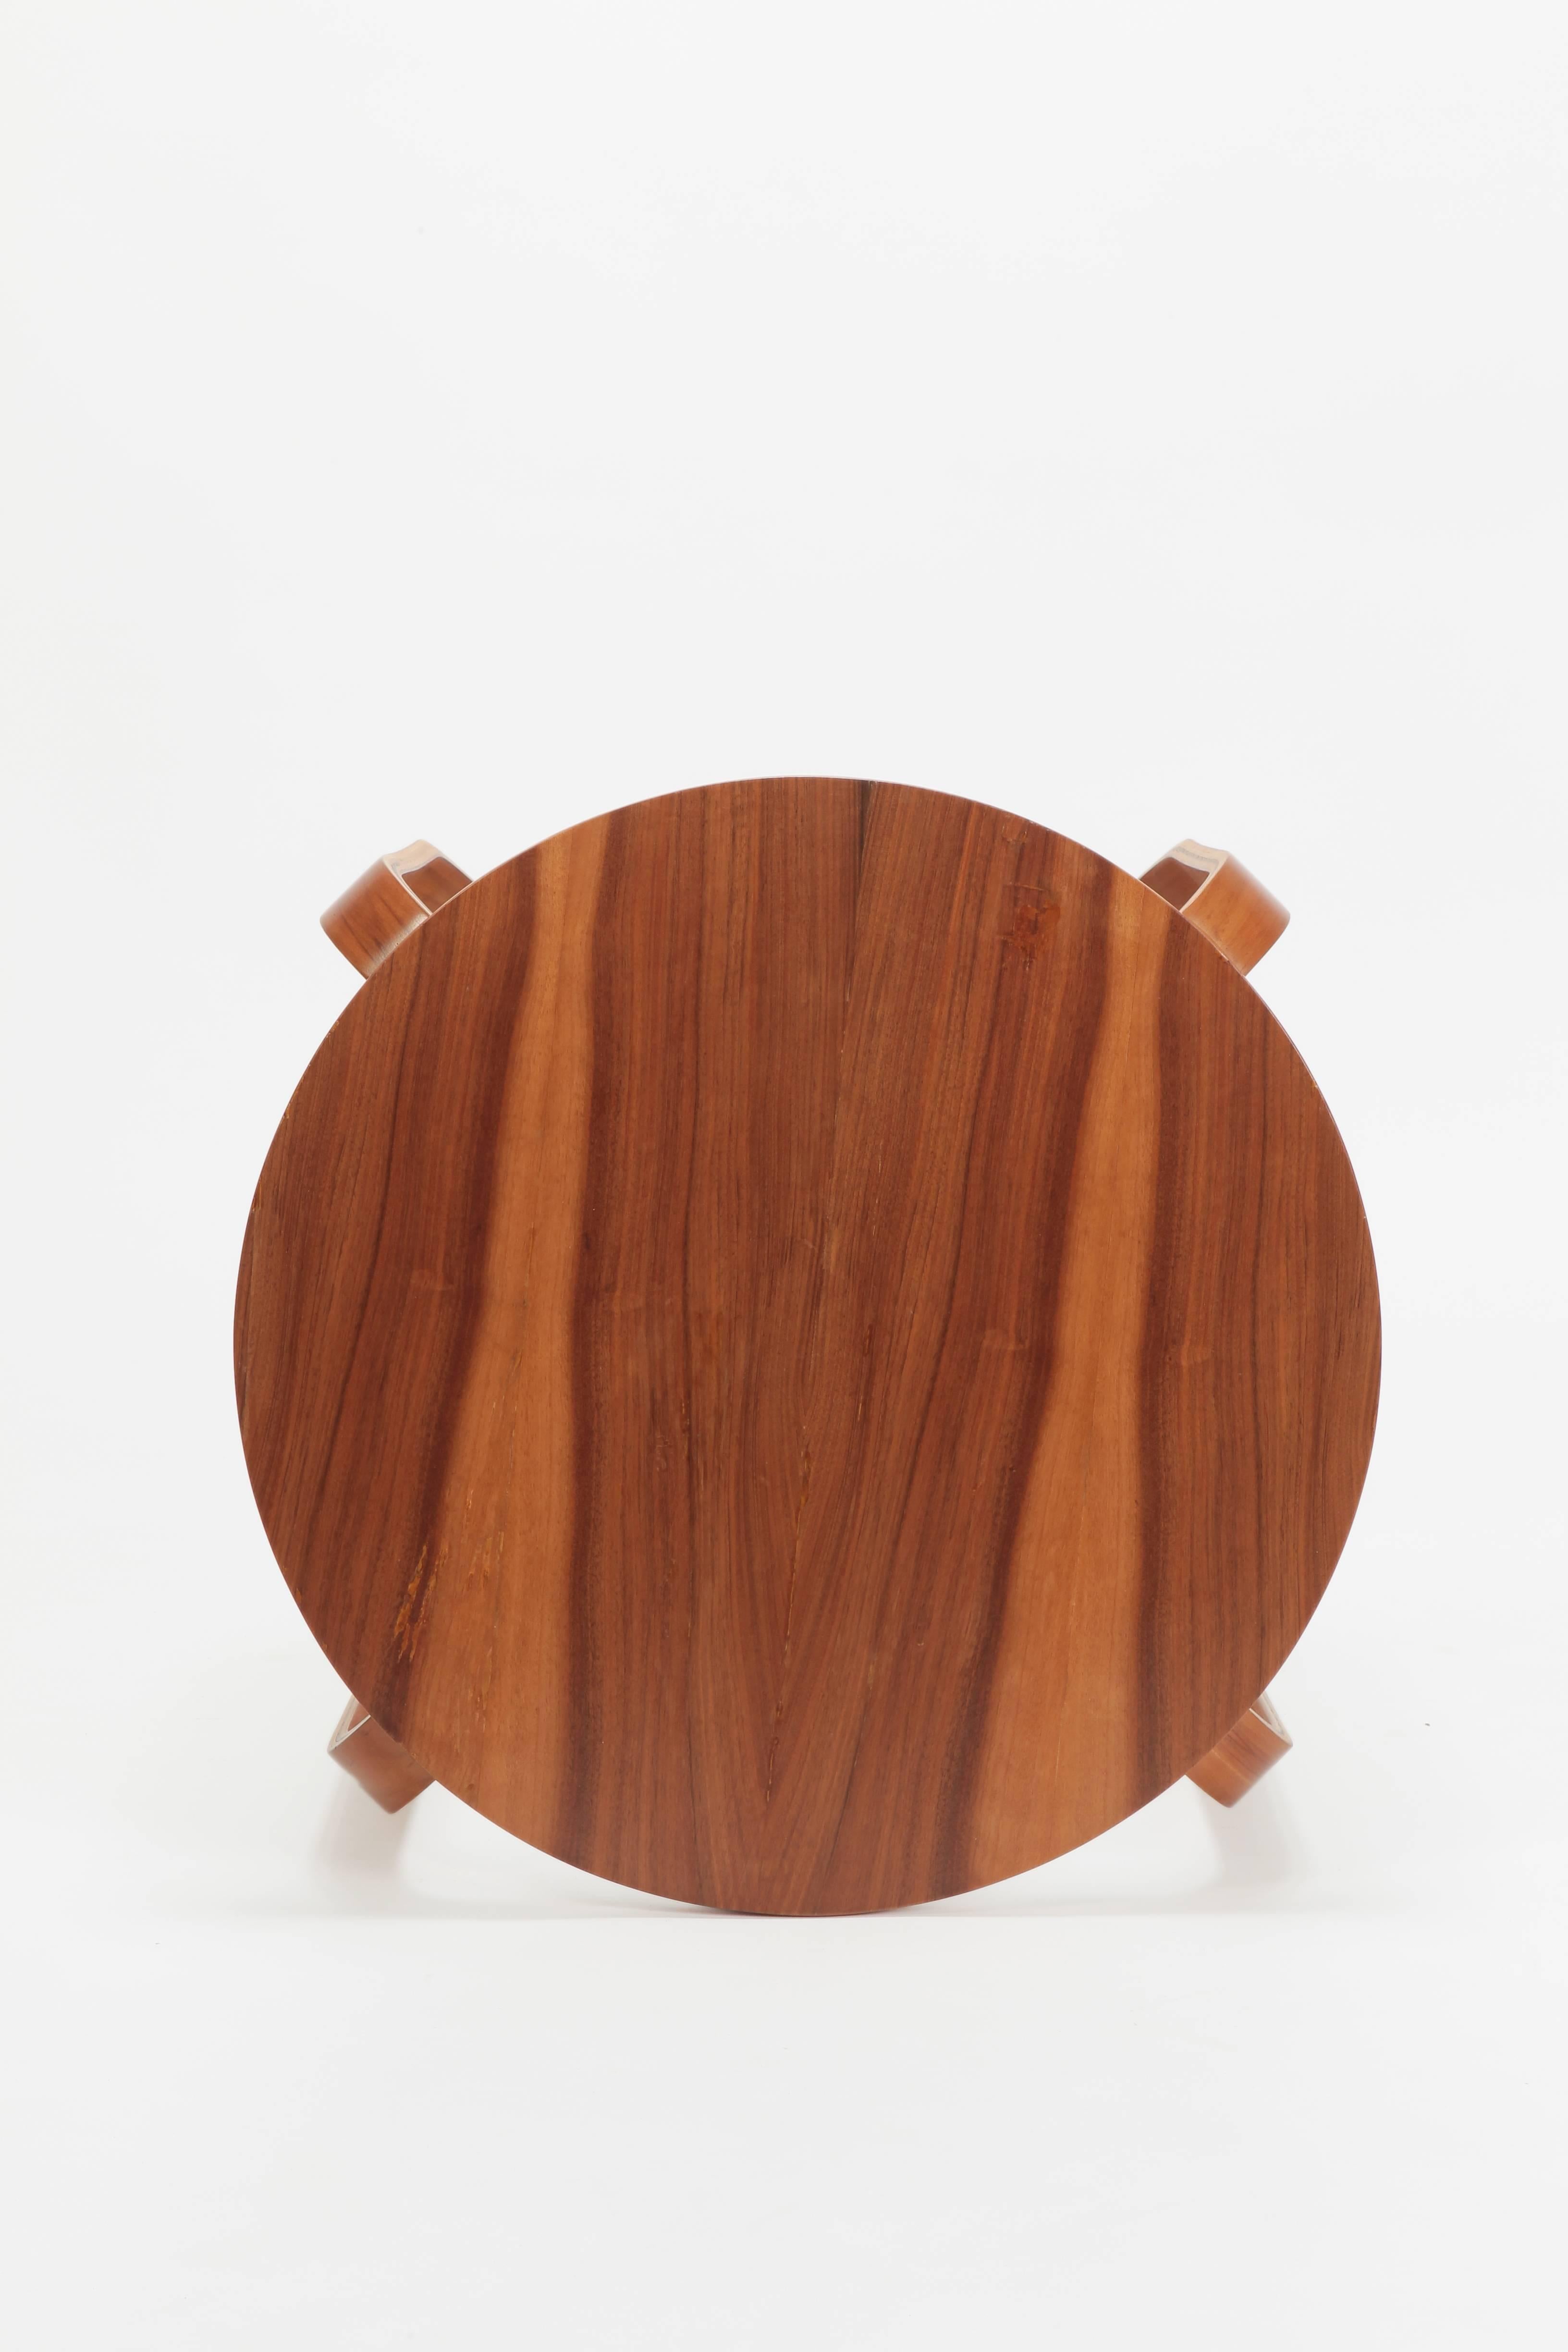 Giuseppe Pagano Pogatschnig Coffee Table, 1930s In Good Condition In Basel, CH